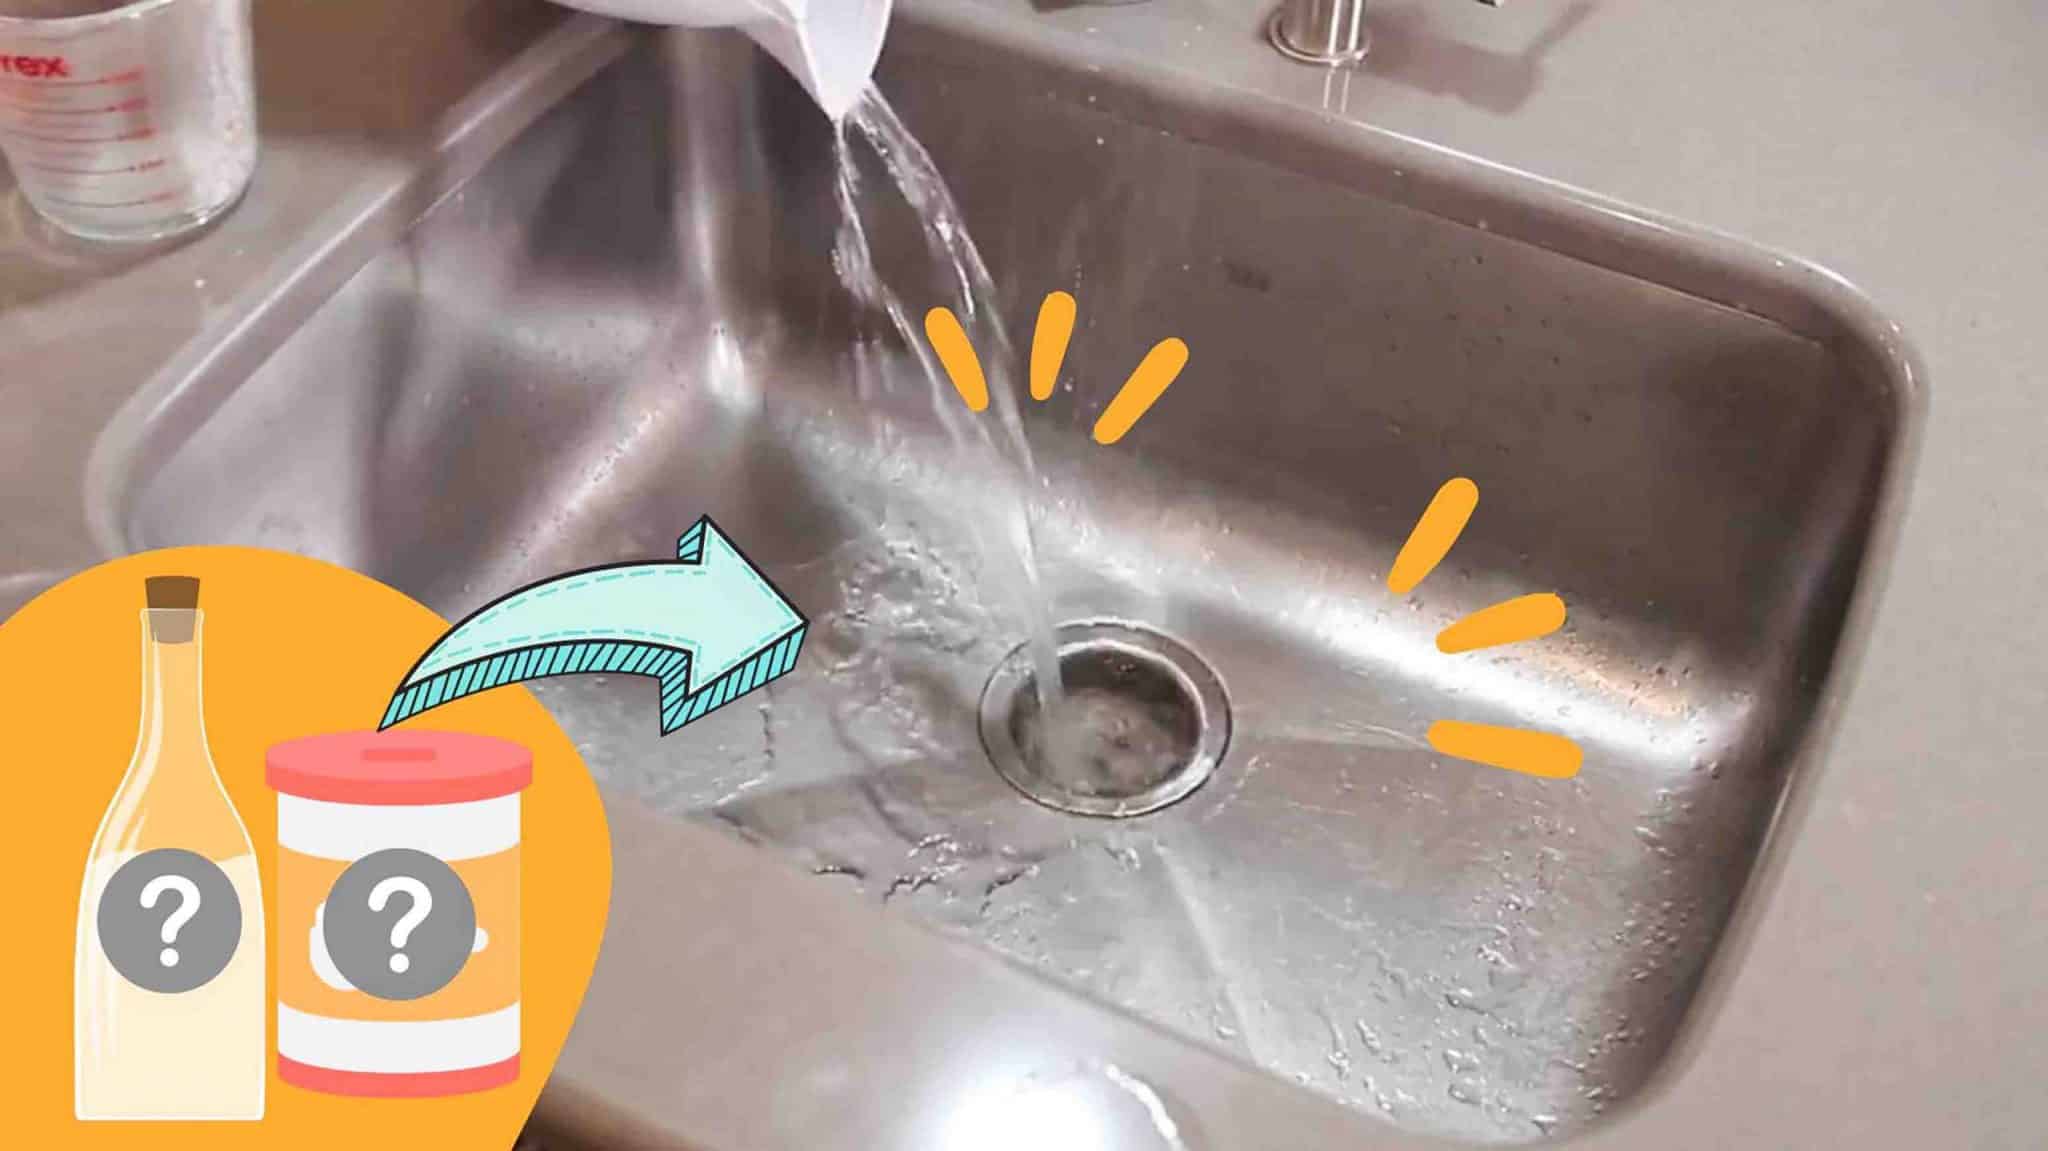 How to Unclog Your Kitchen Sink: 7 Simple Ways to Clear a Drain Fast